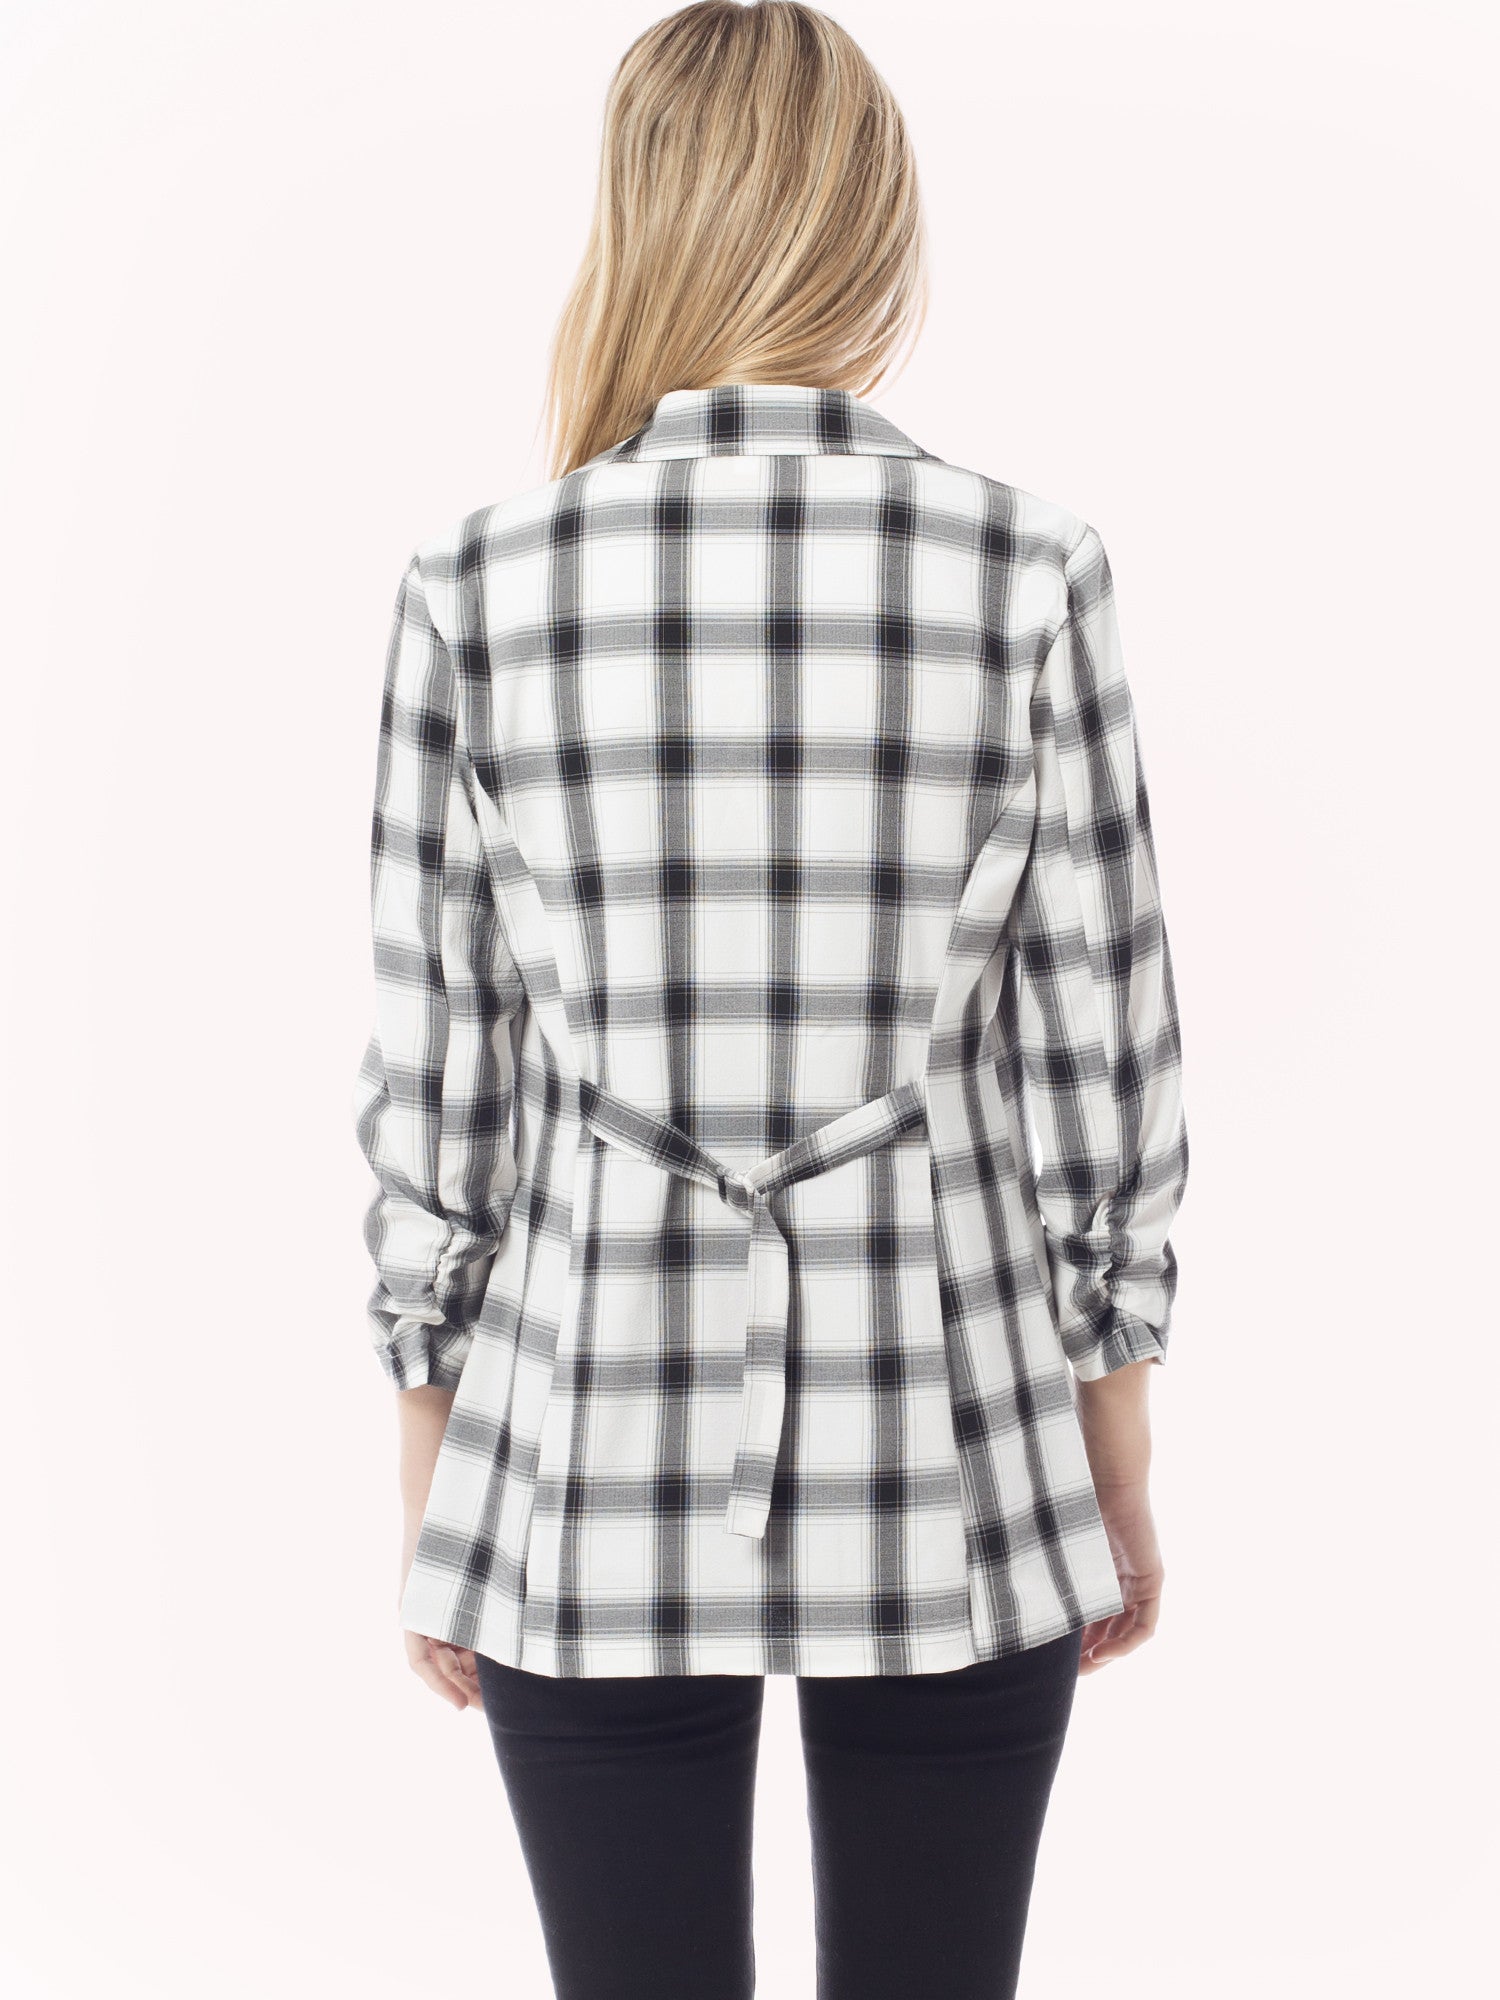 Window Pane Plaid Ruched 3/4 Sleeve Buttonless Stretchy Blazer